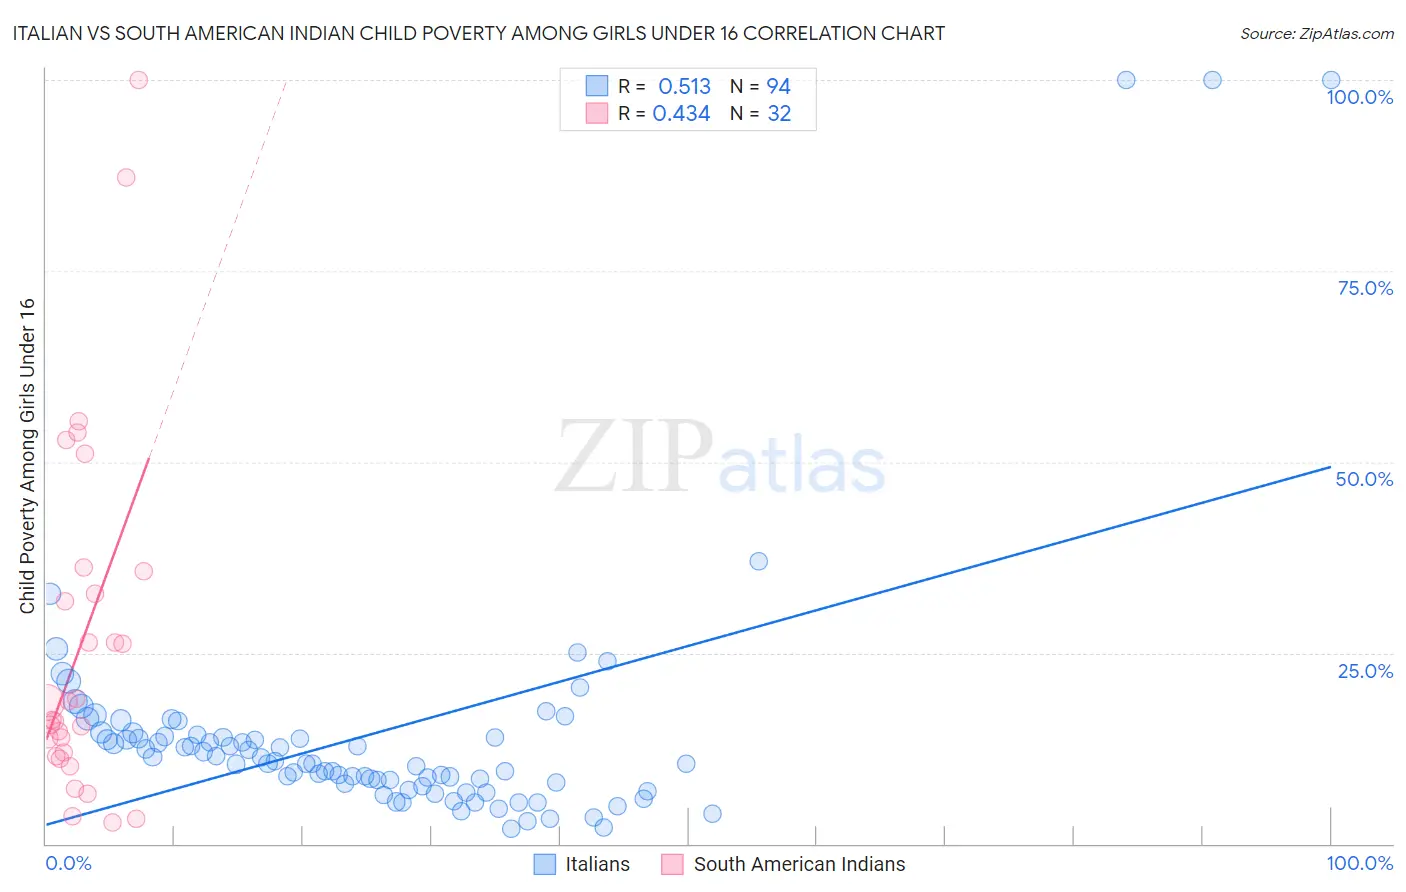 Italian vs South American Indian Child Poverty Among Girls Under 16